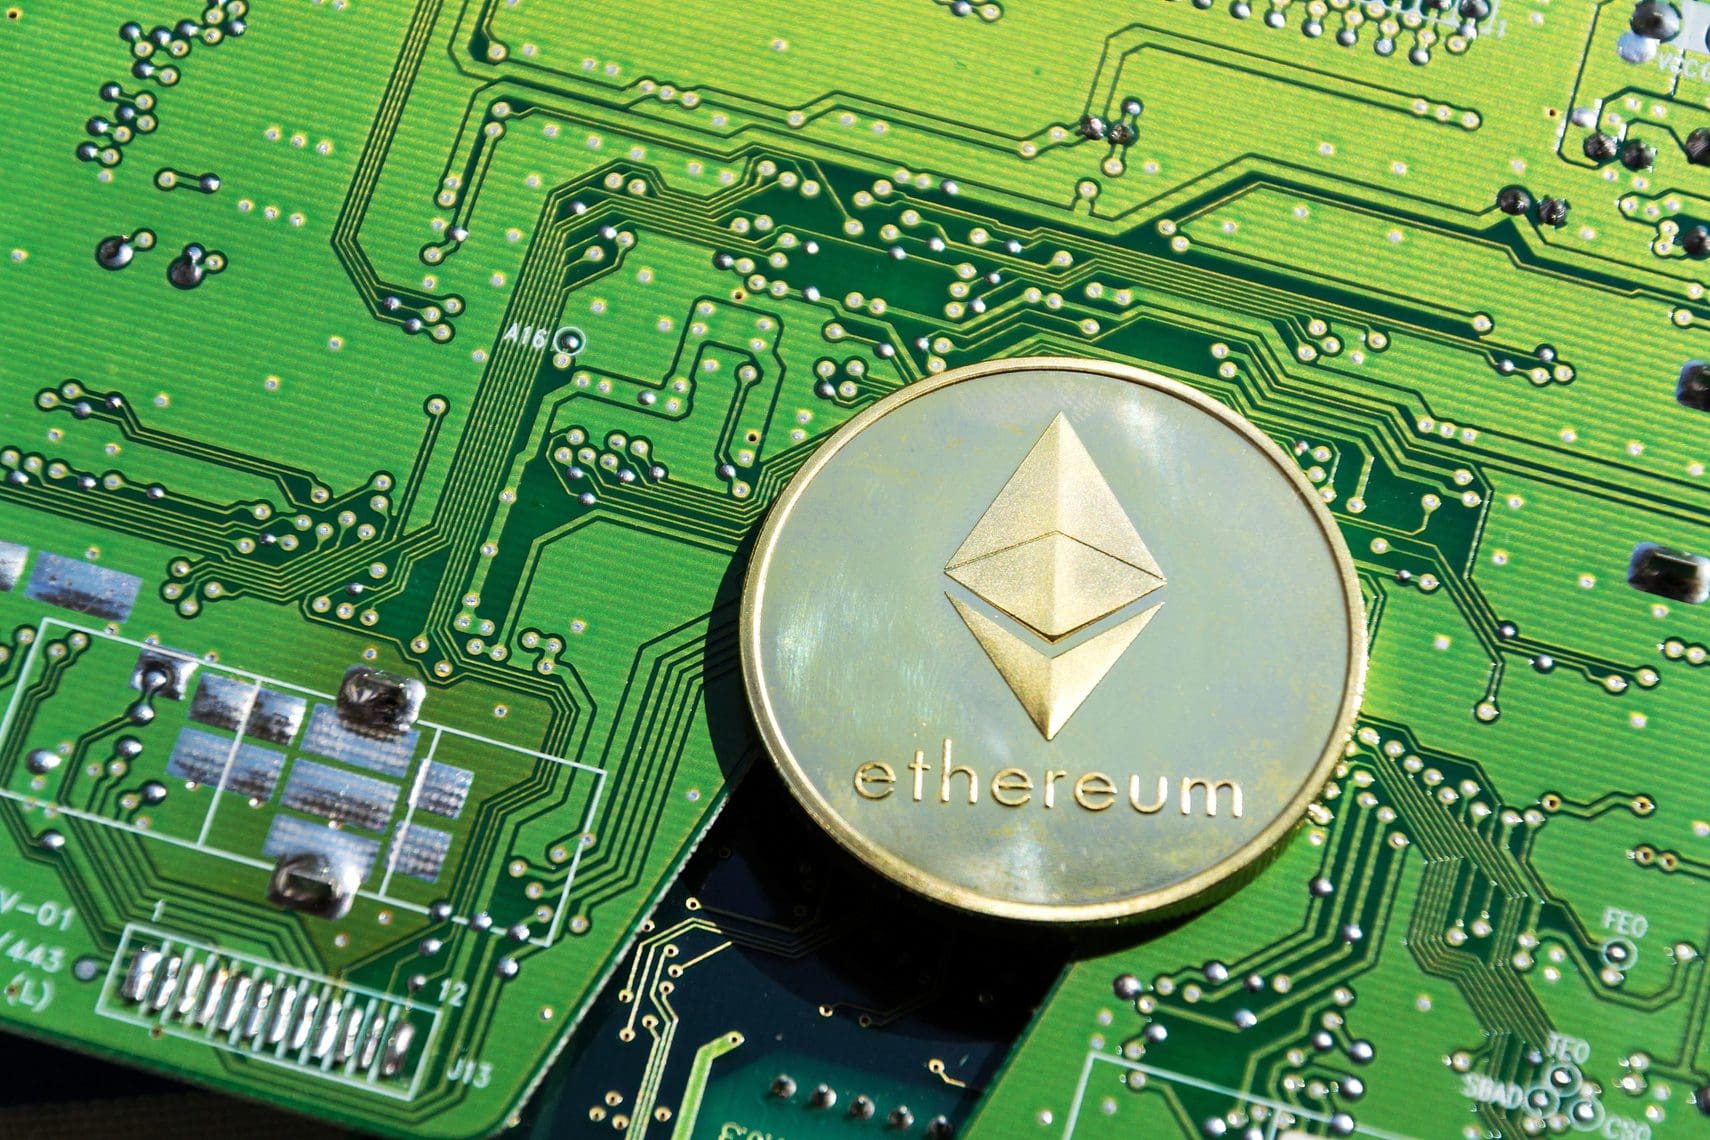 Golden Ethereum coin lying on computer motherboard, cryptocurrency investing, blockchain technology concept